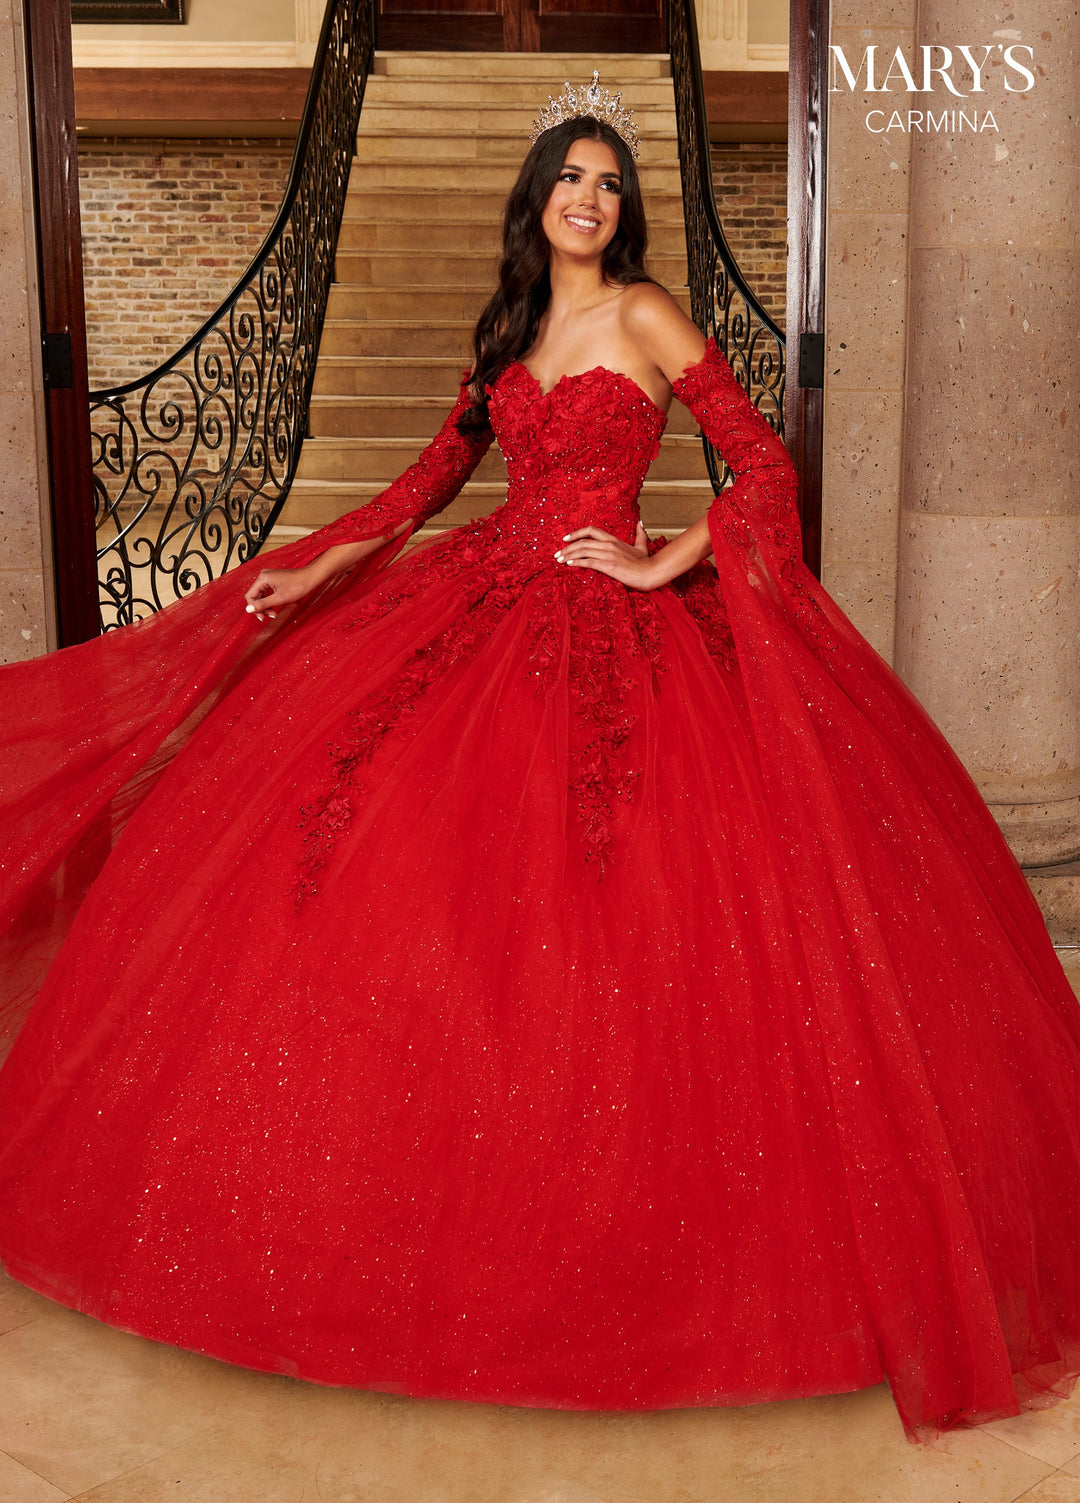 Floor Length Sleeve Quinceanera Dress by Mary's Bridal MQ1092